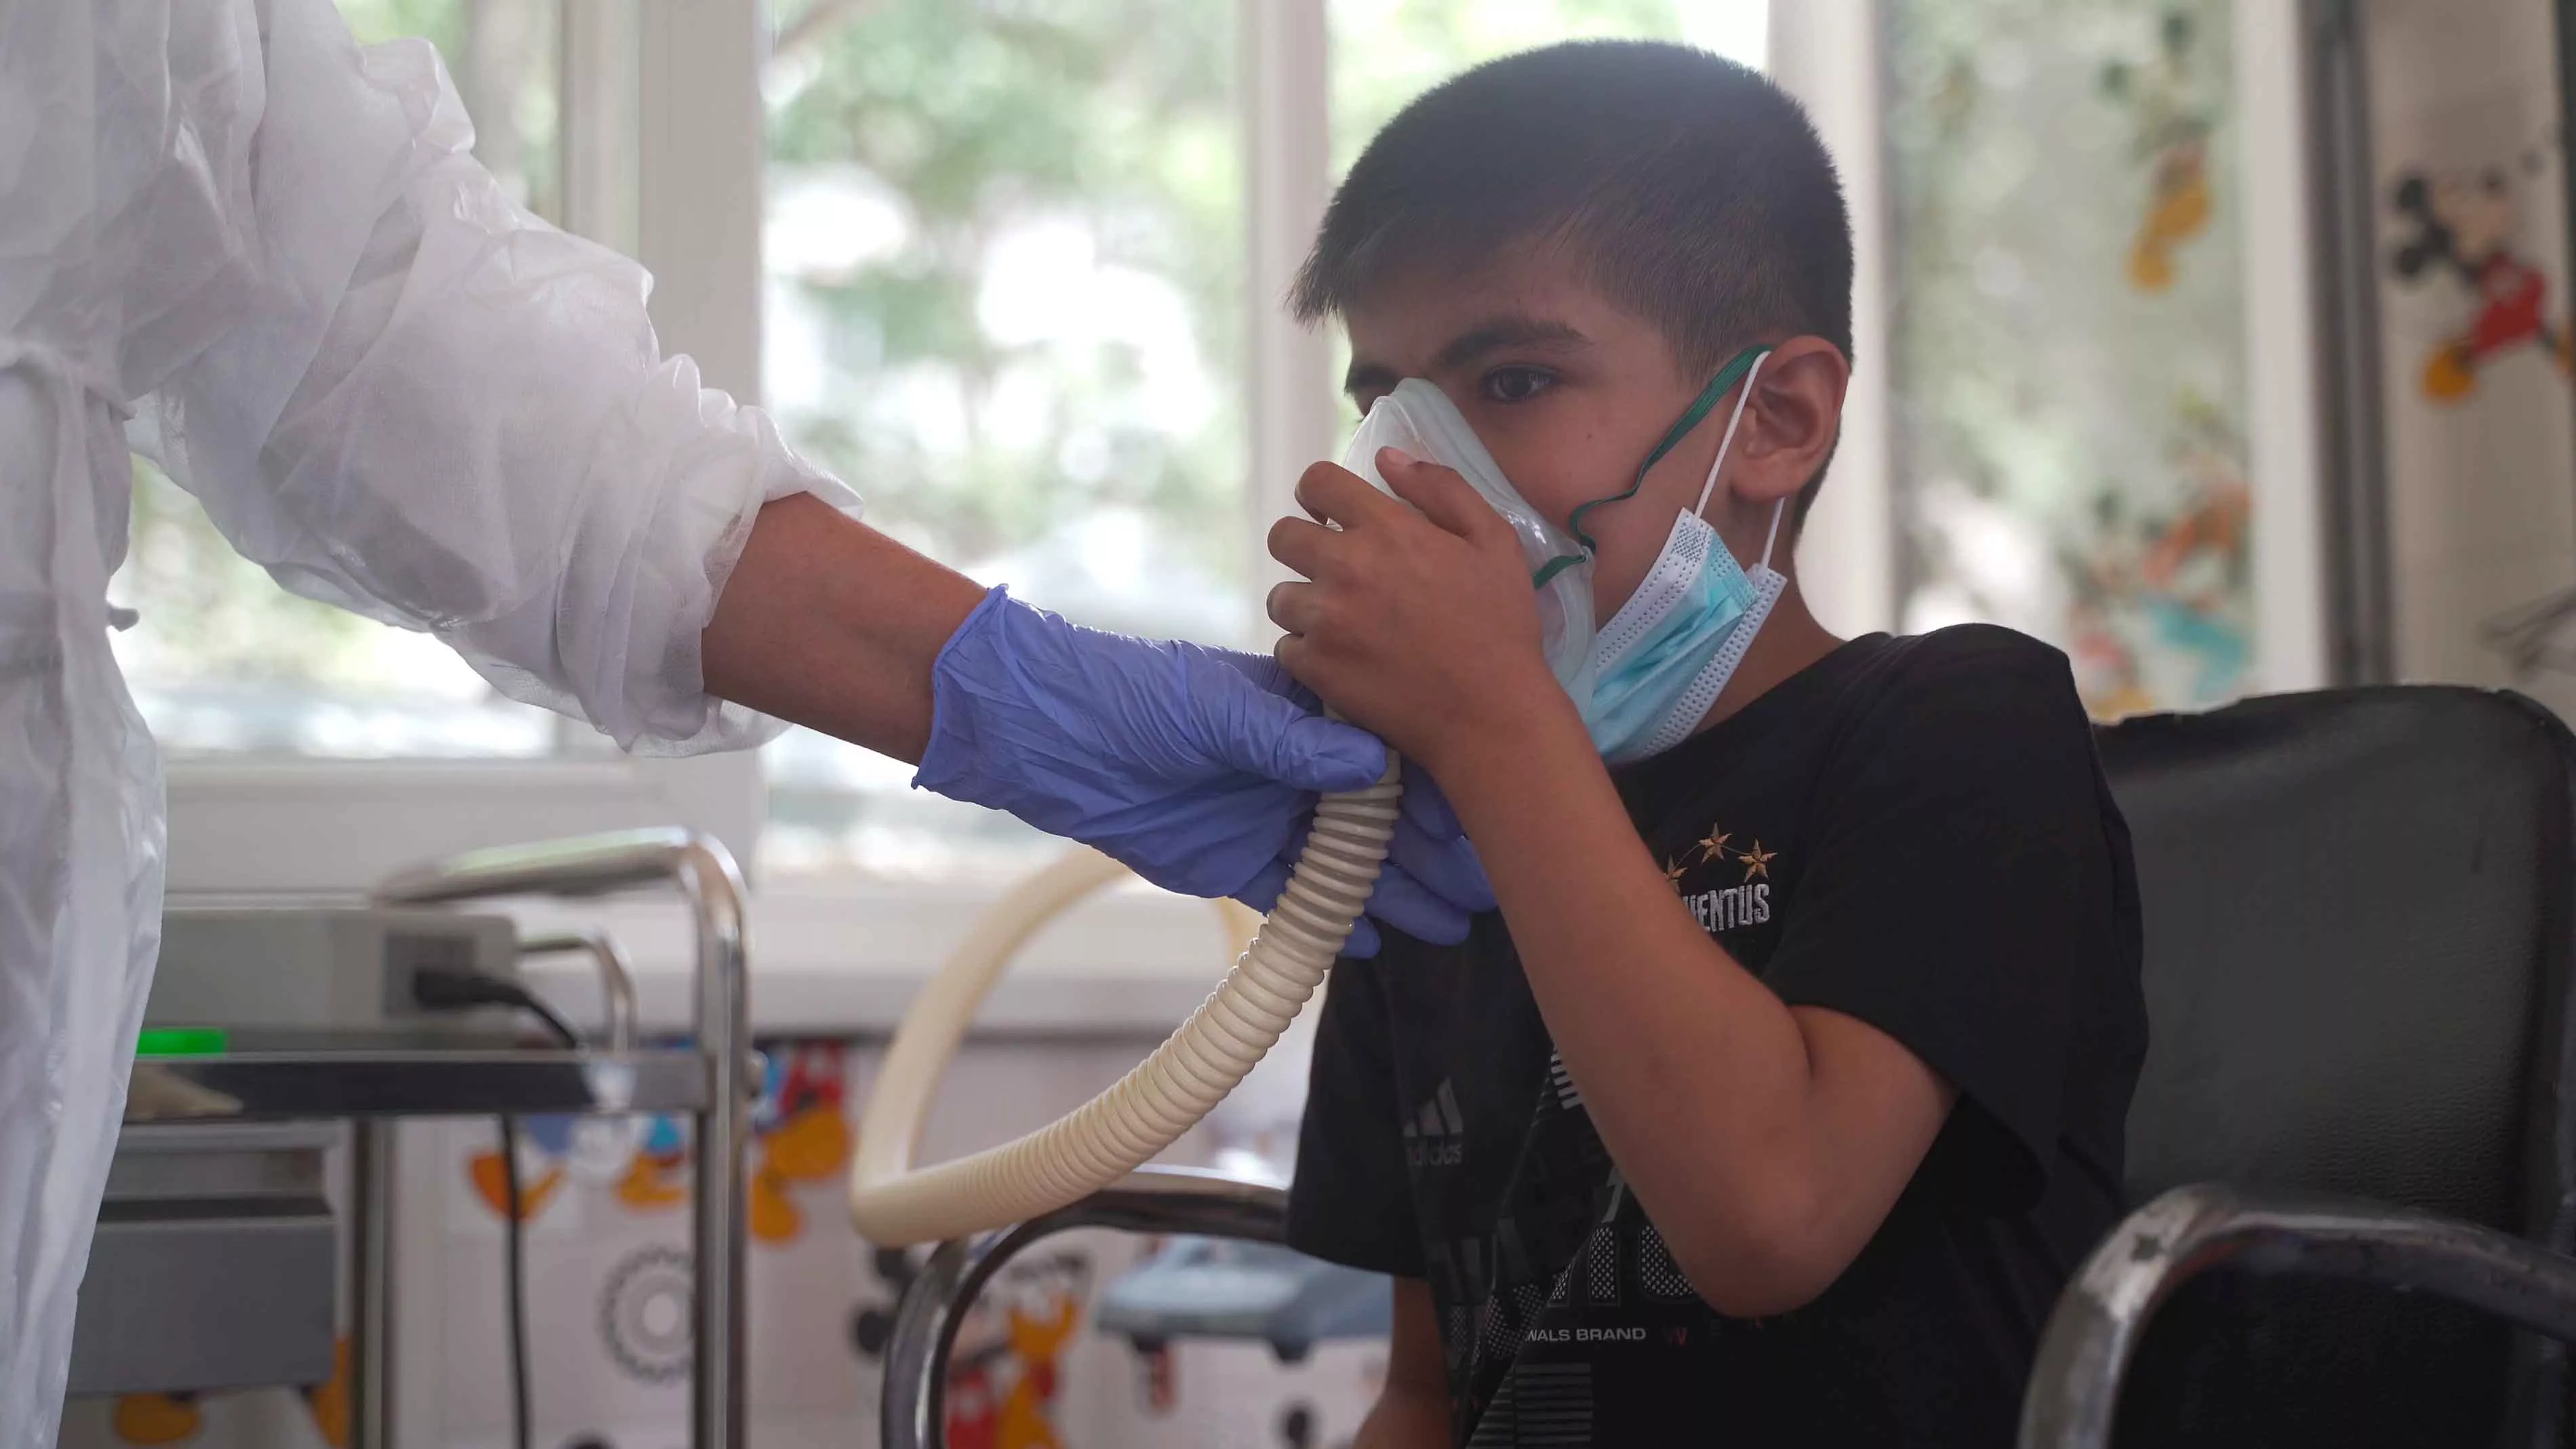 Muhammad Yusuf (8) is undergoing a sputum induction in a specialized room in Paediatric TB hospital in Dushanbe. Sputum is a thick mucus that adults cough up when their lungs are diseased or damaged. Analysing sputum culture is considered the best way to diagnose TB. However, children have great difficulty in producing it themselves. Sputum induction uses a nebulizer machine through which the child inhales concentrated saline solution, that leads to coughing and sputum production.